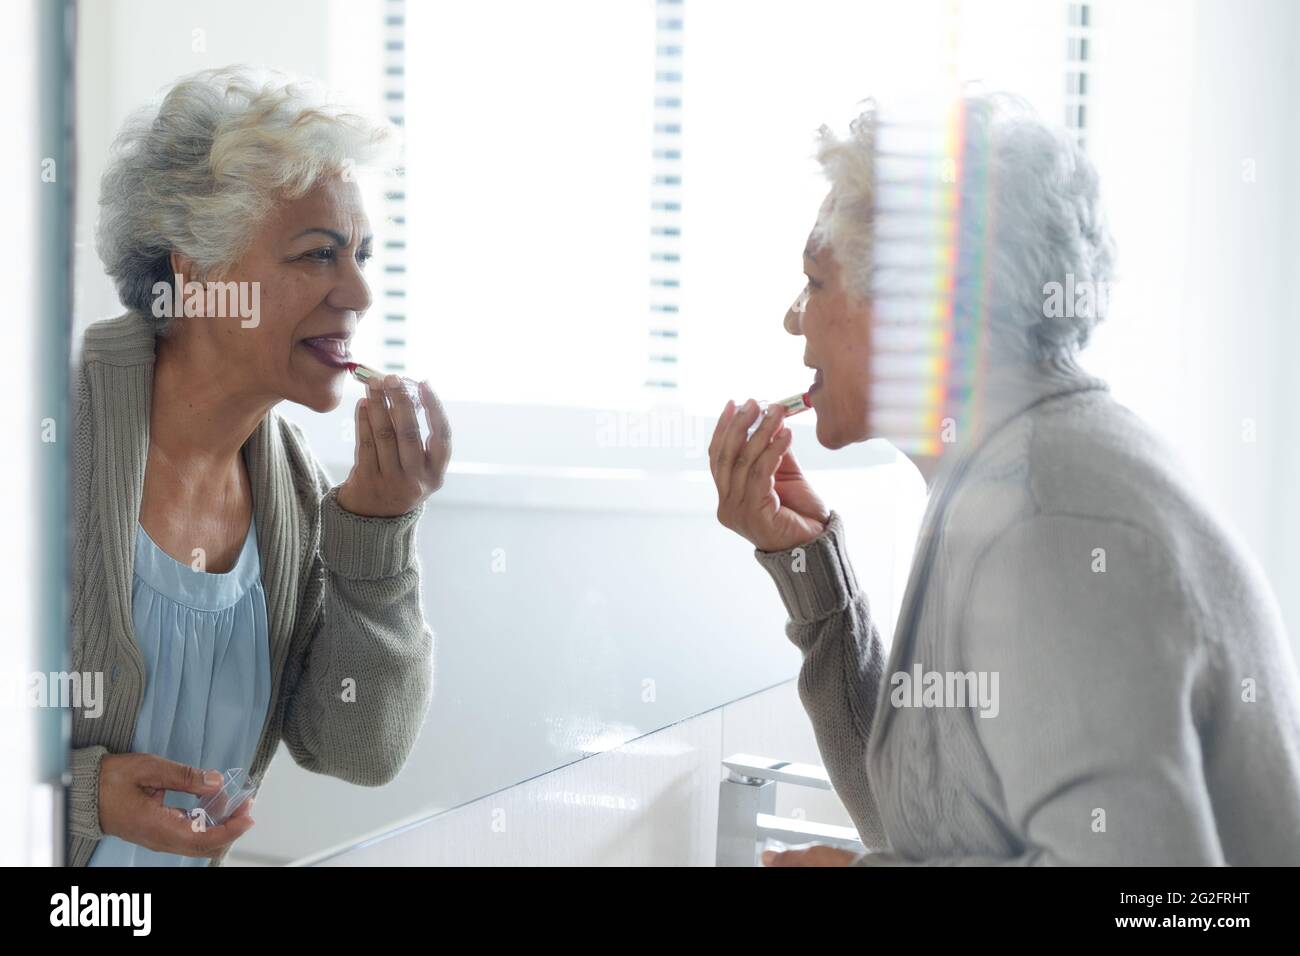 Mixed race senior woman looking at her reflection in mirror wearing lipstick Stock Photo